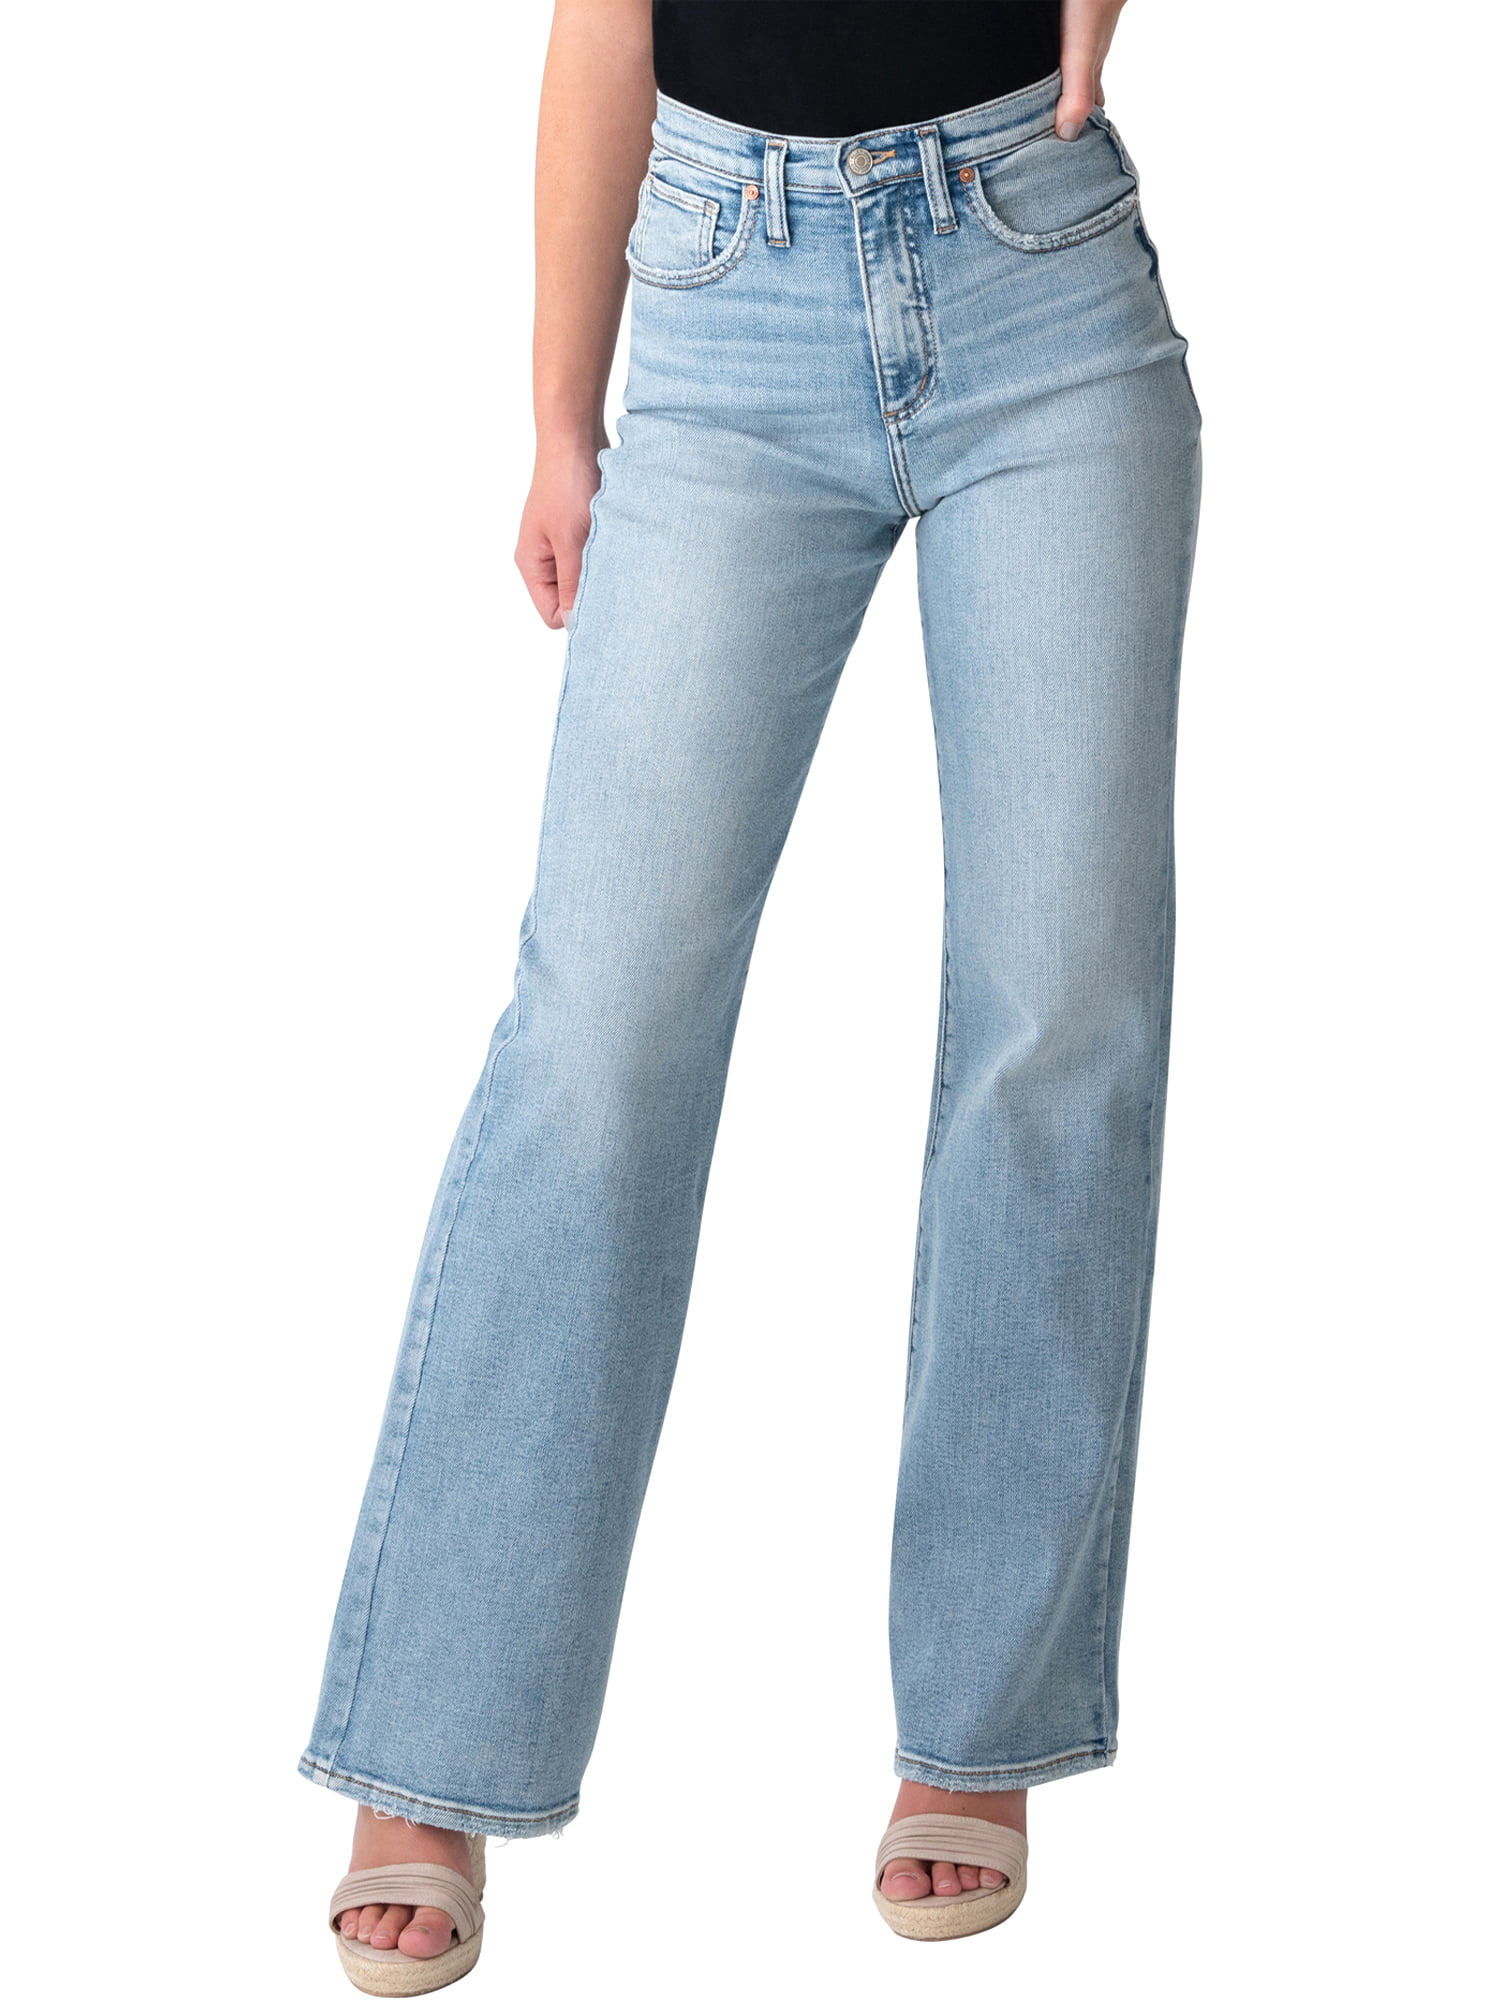 Silver Jeans Co. Women's Highly Desirable High Rise Trouser Leg Jeans,  Waist Sizes 24-36 